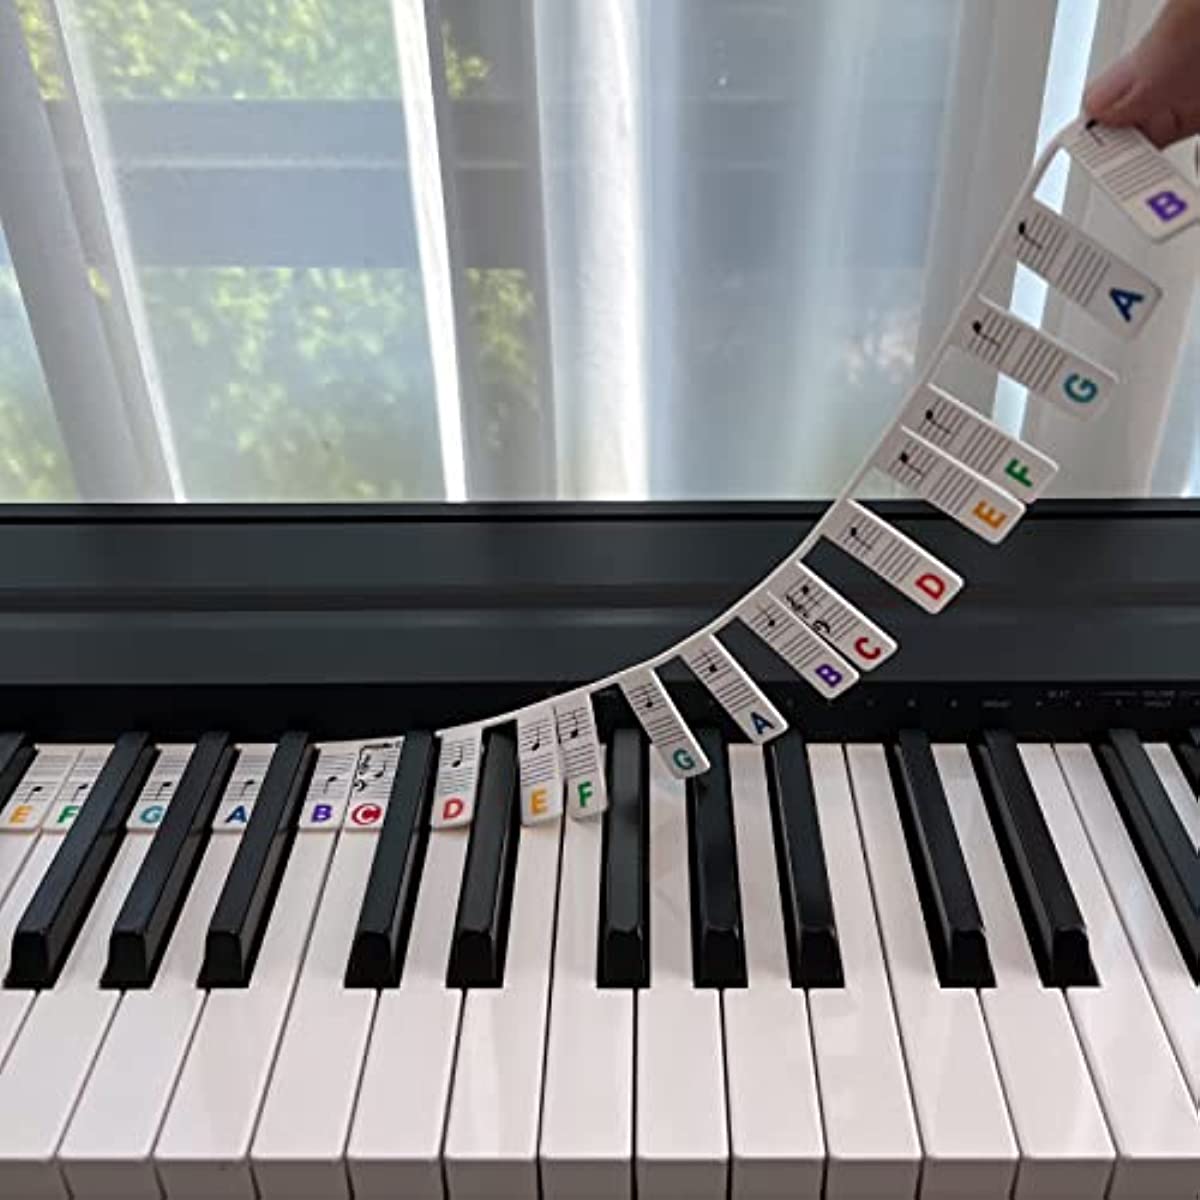  Removable Piano Keyboard Note Labels - Piano Notes